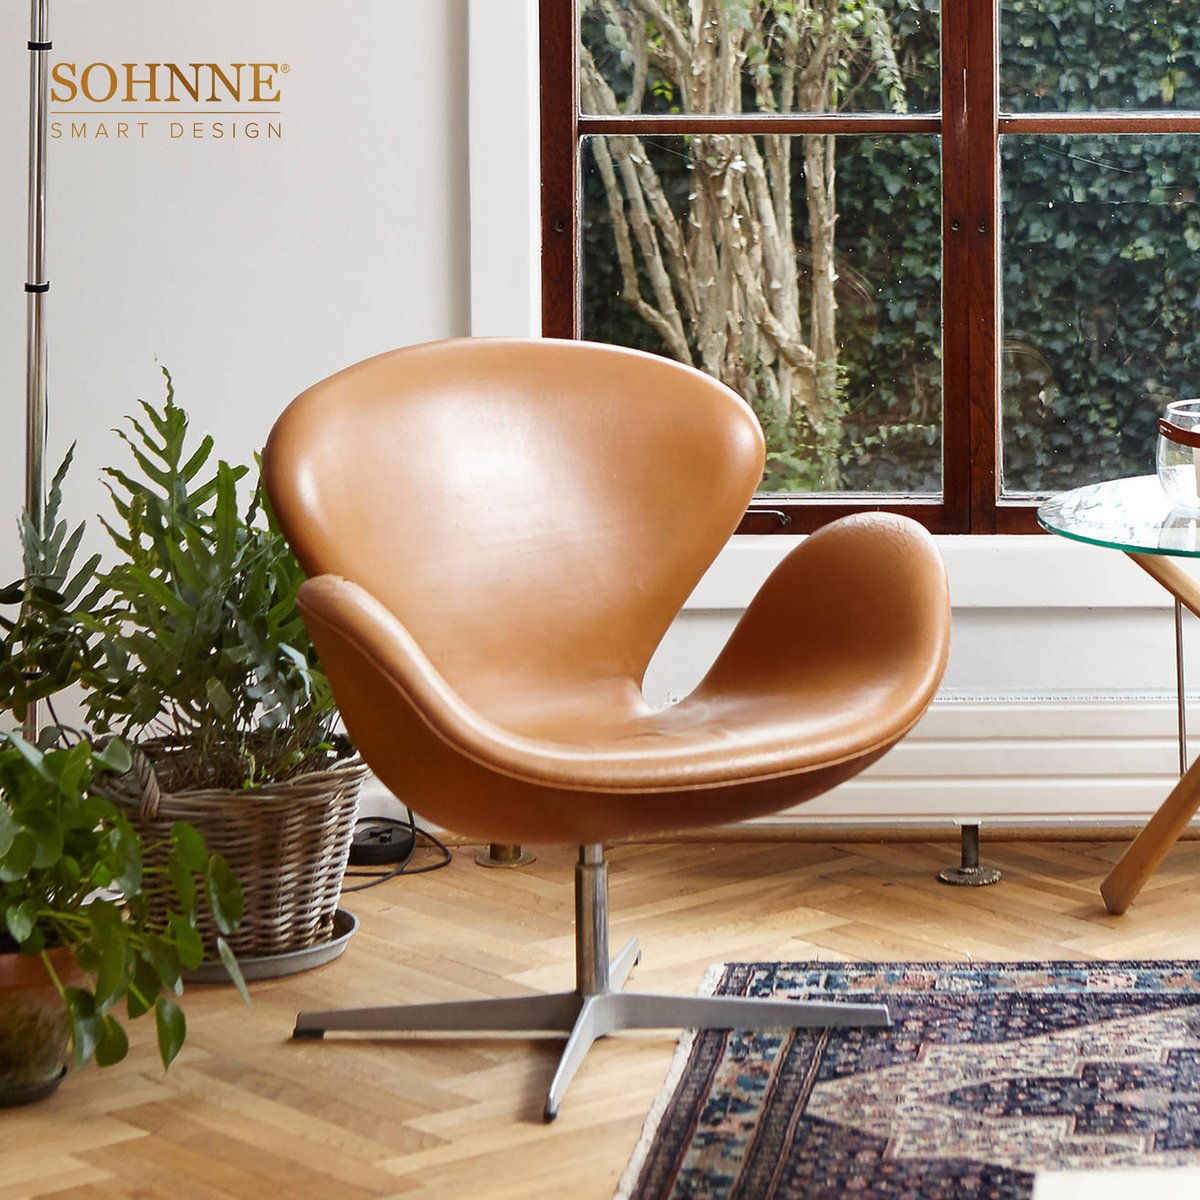 Step into the Danish Modern Era with our Swan Chair Replica ($1,239). Offer you a truly unique and innovative seating option.

#DanishModern #IconicDesign #ArneJacobsen #SwanChairReplica